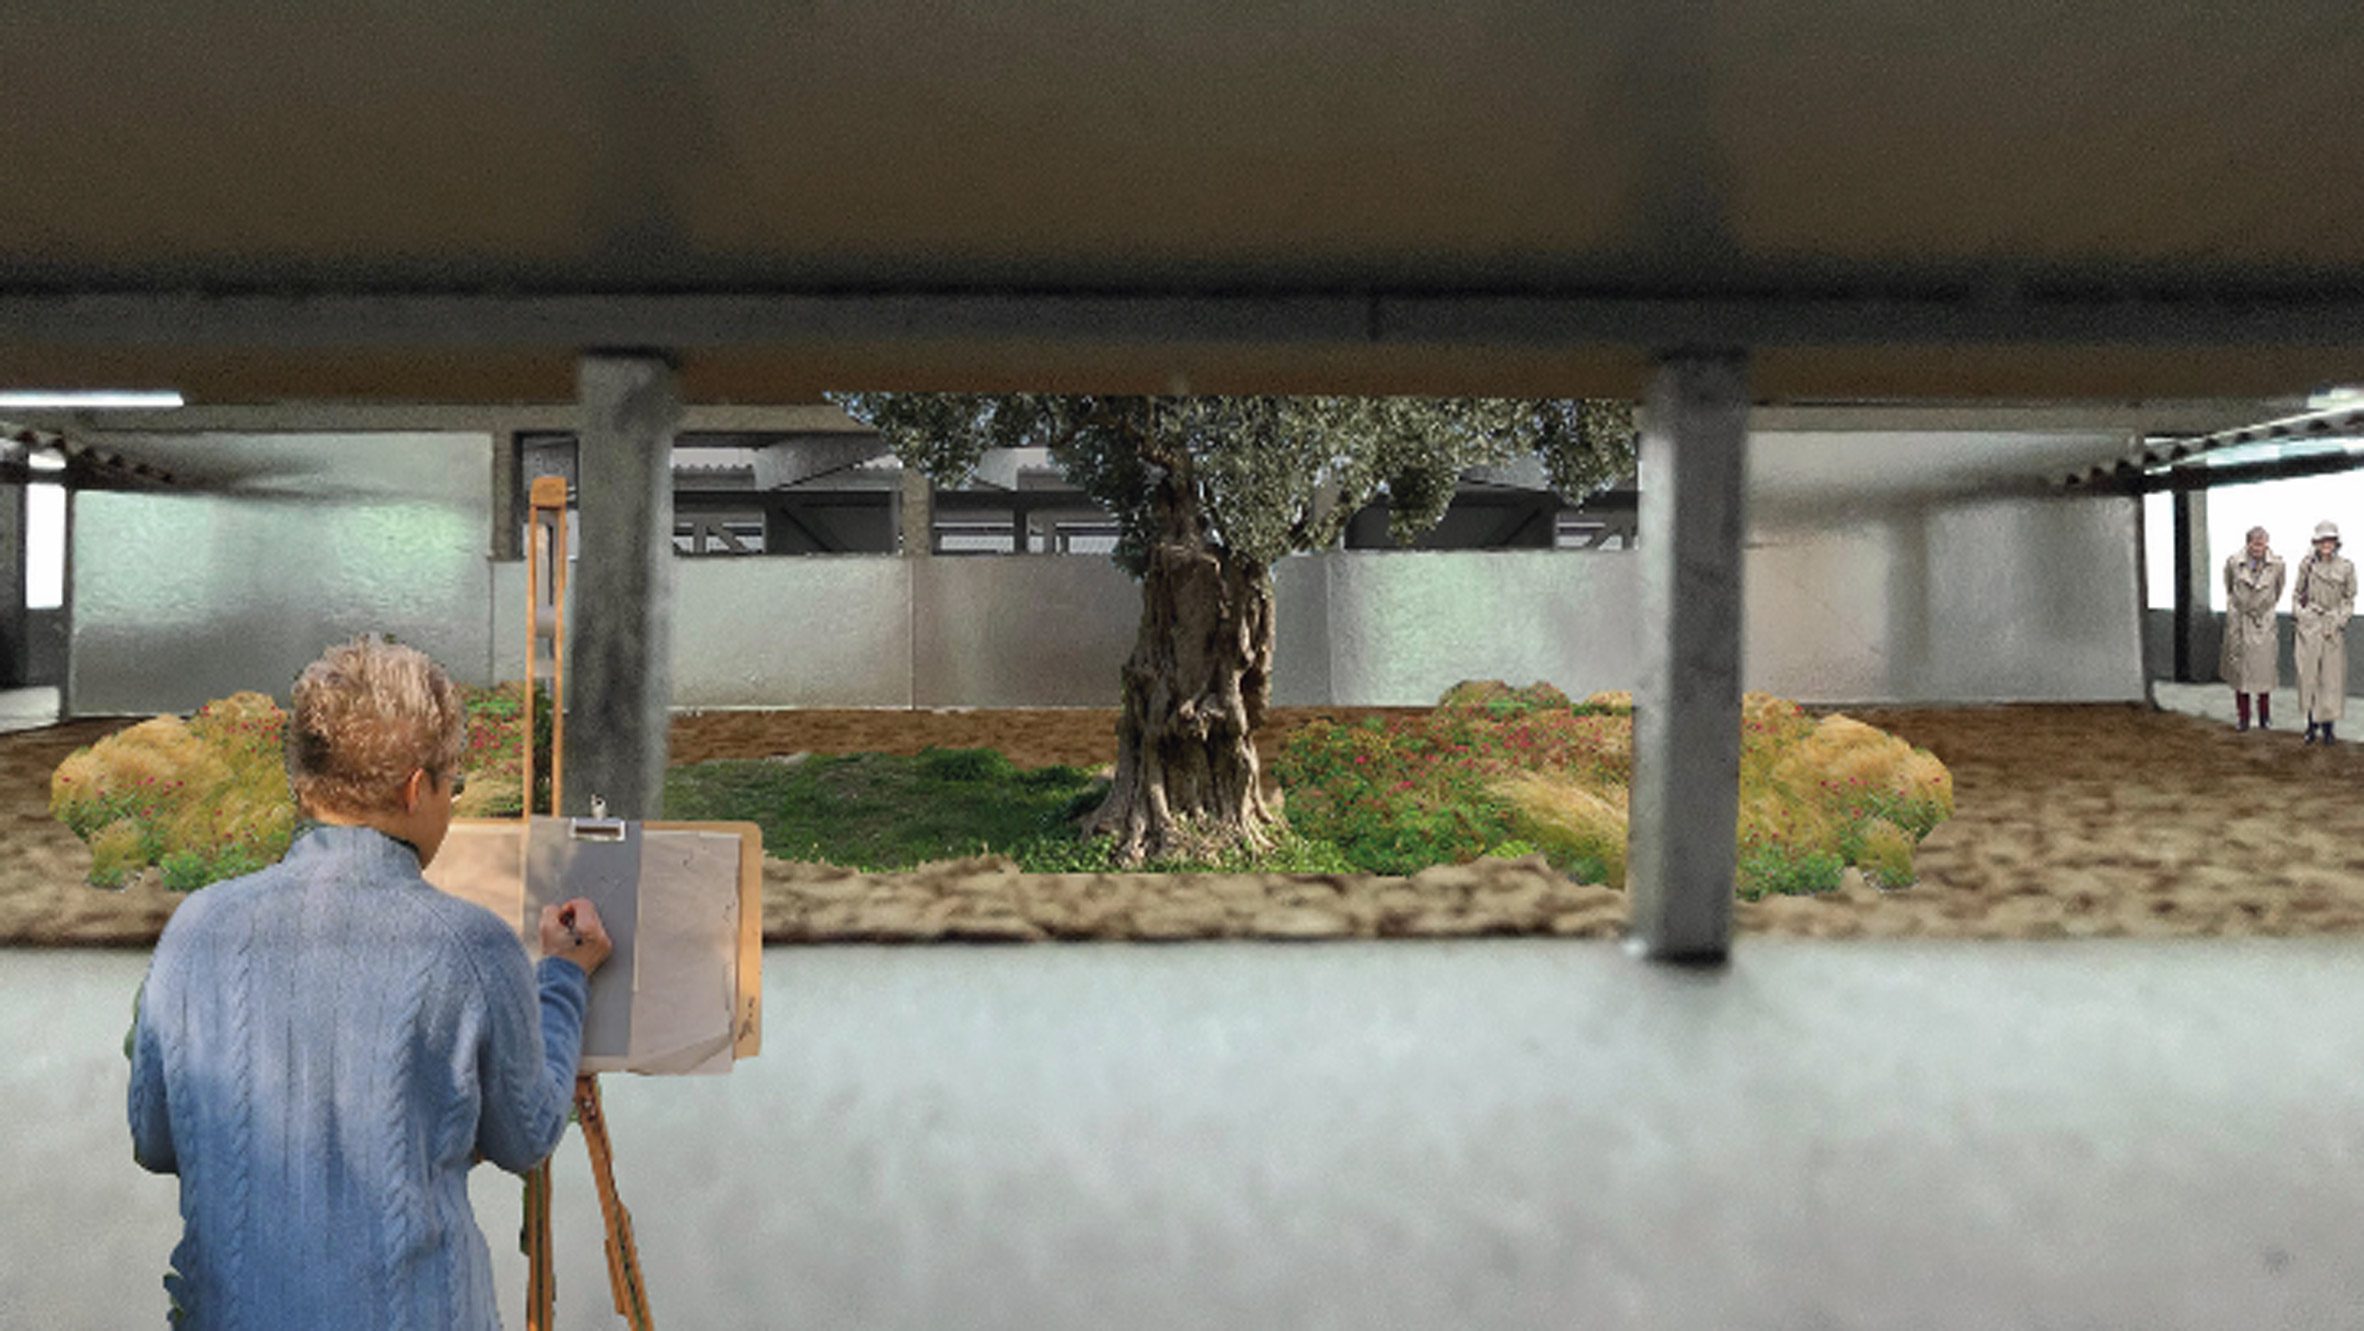 Visualisation showing person drawing a tree inside former grain soli